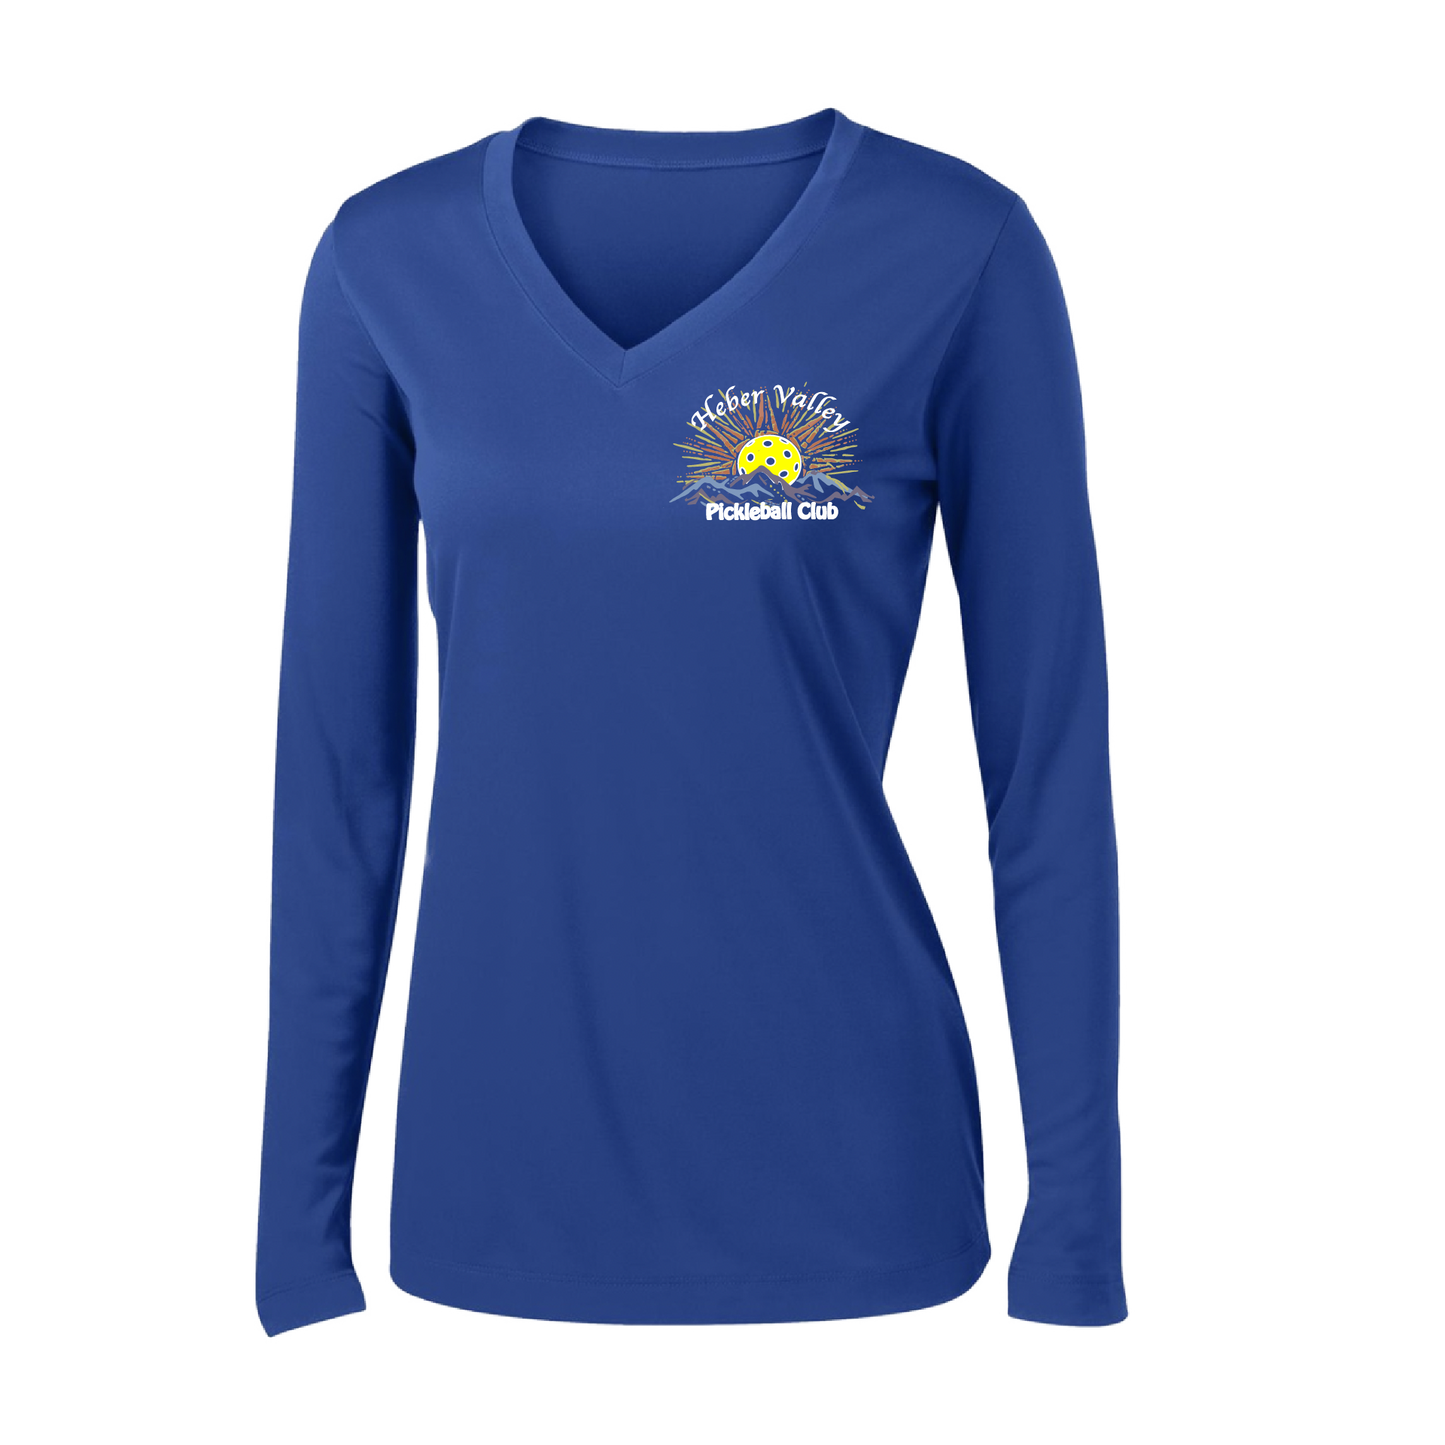 Pickleball Shirt Design: Heber Valley Pickleball Club  Women's Style: Long Sleeve V-Neck  Turn up the volume in this Women's shirt with its perfect mix of softness and attitude. Material is ultra-comfortable with moisture wicking properties and tri-blend softness. PosiCharge technology locks in color. Highly breathable and lightweight.